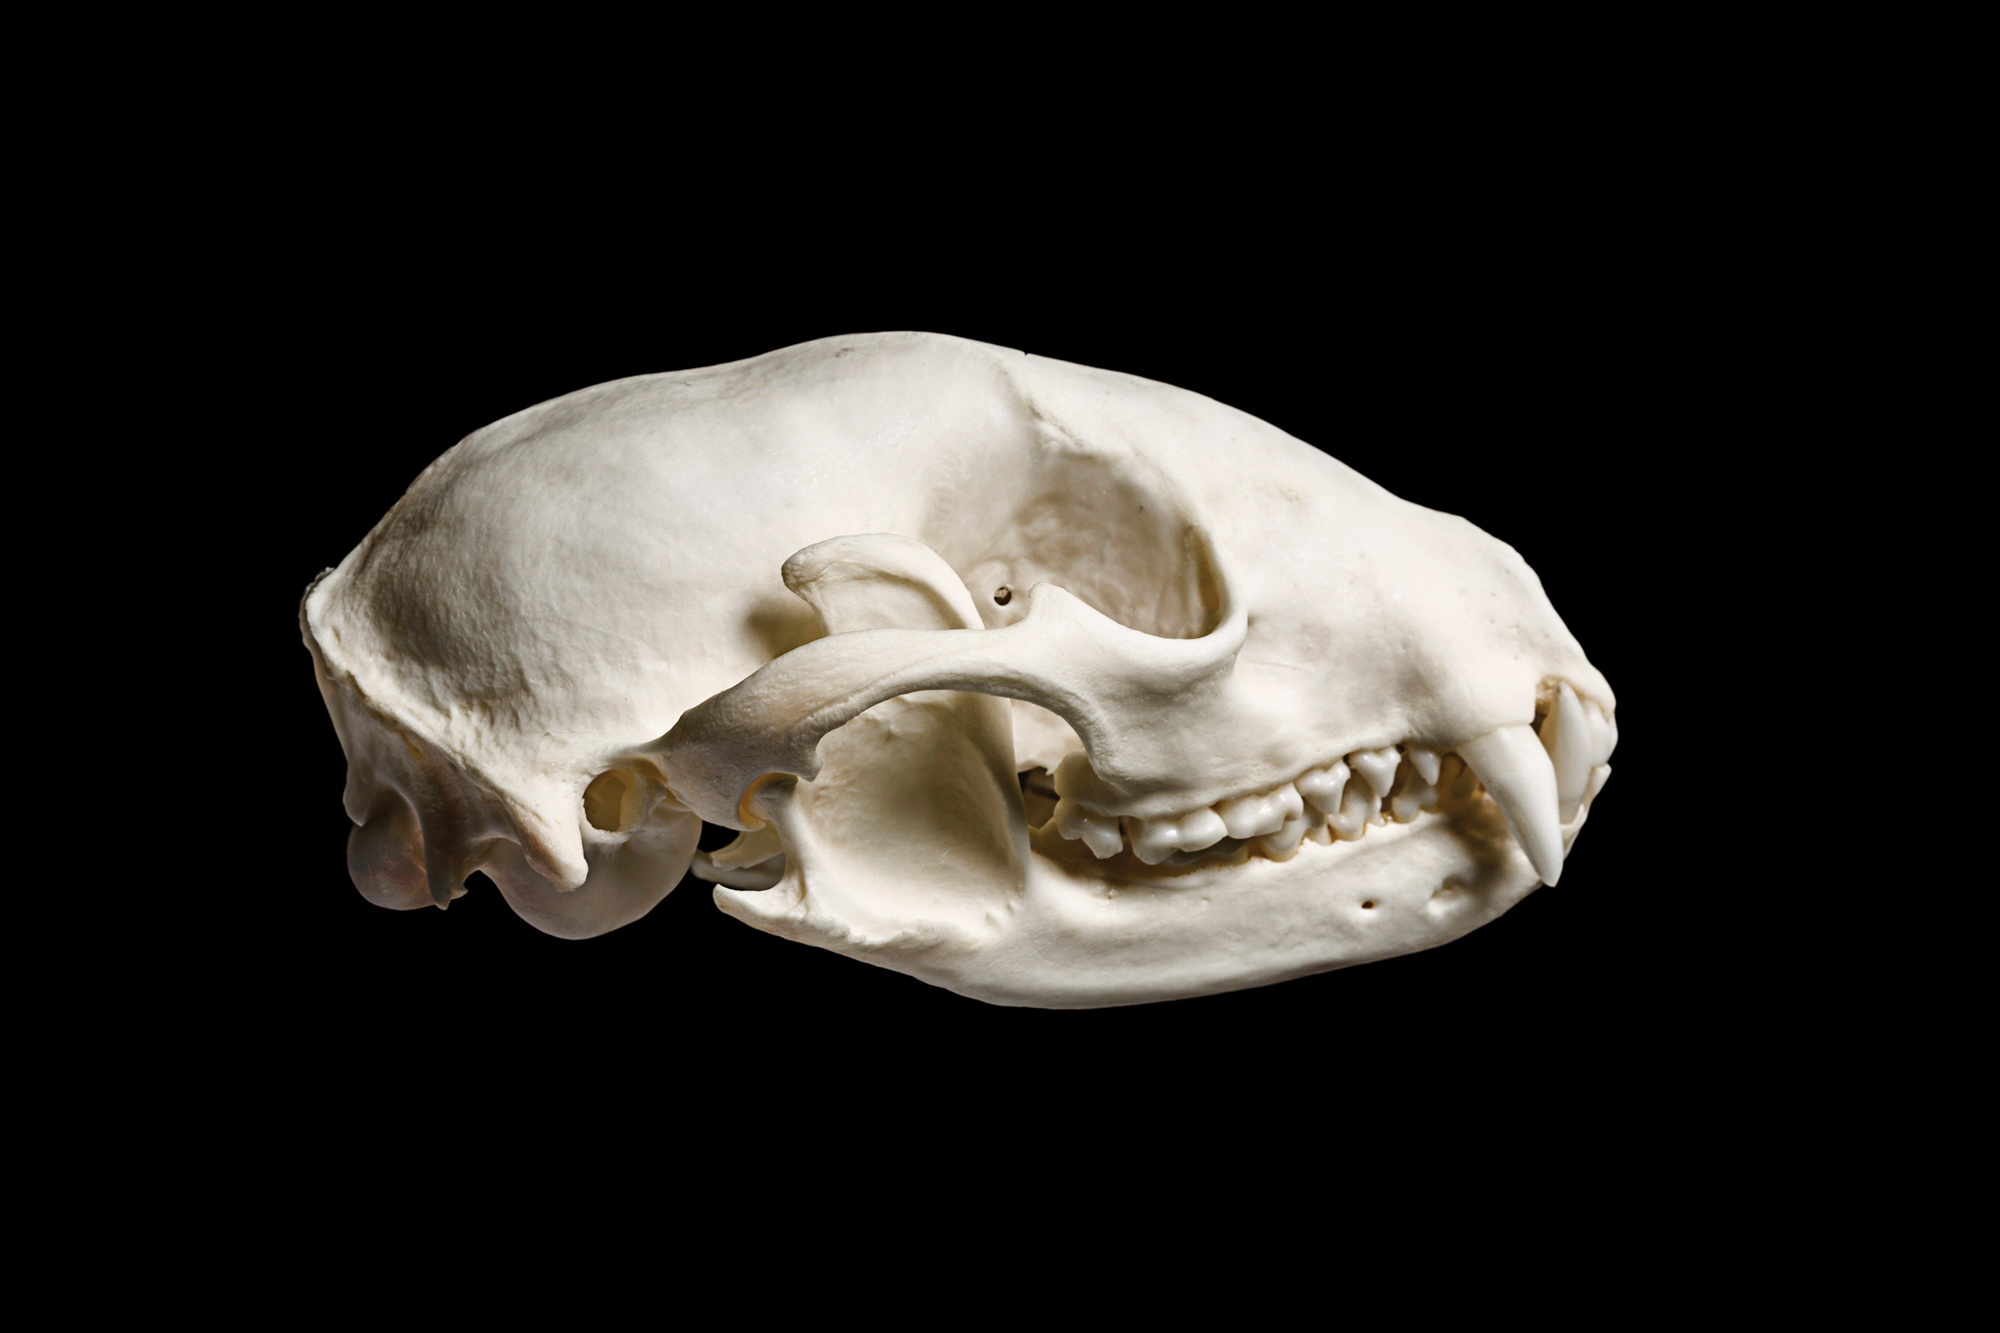 A raccoon skull on a black background.